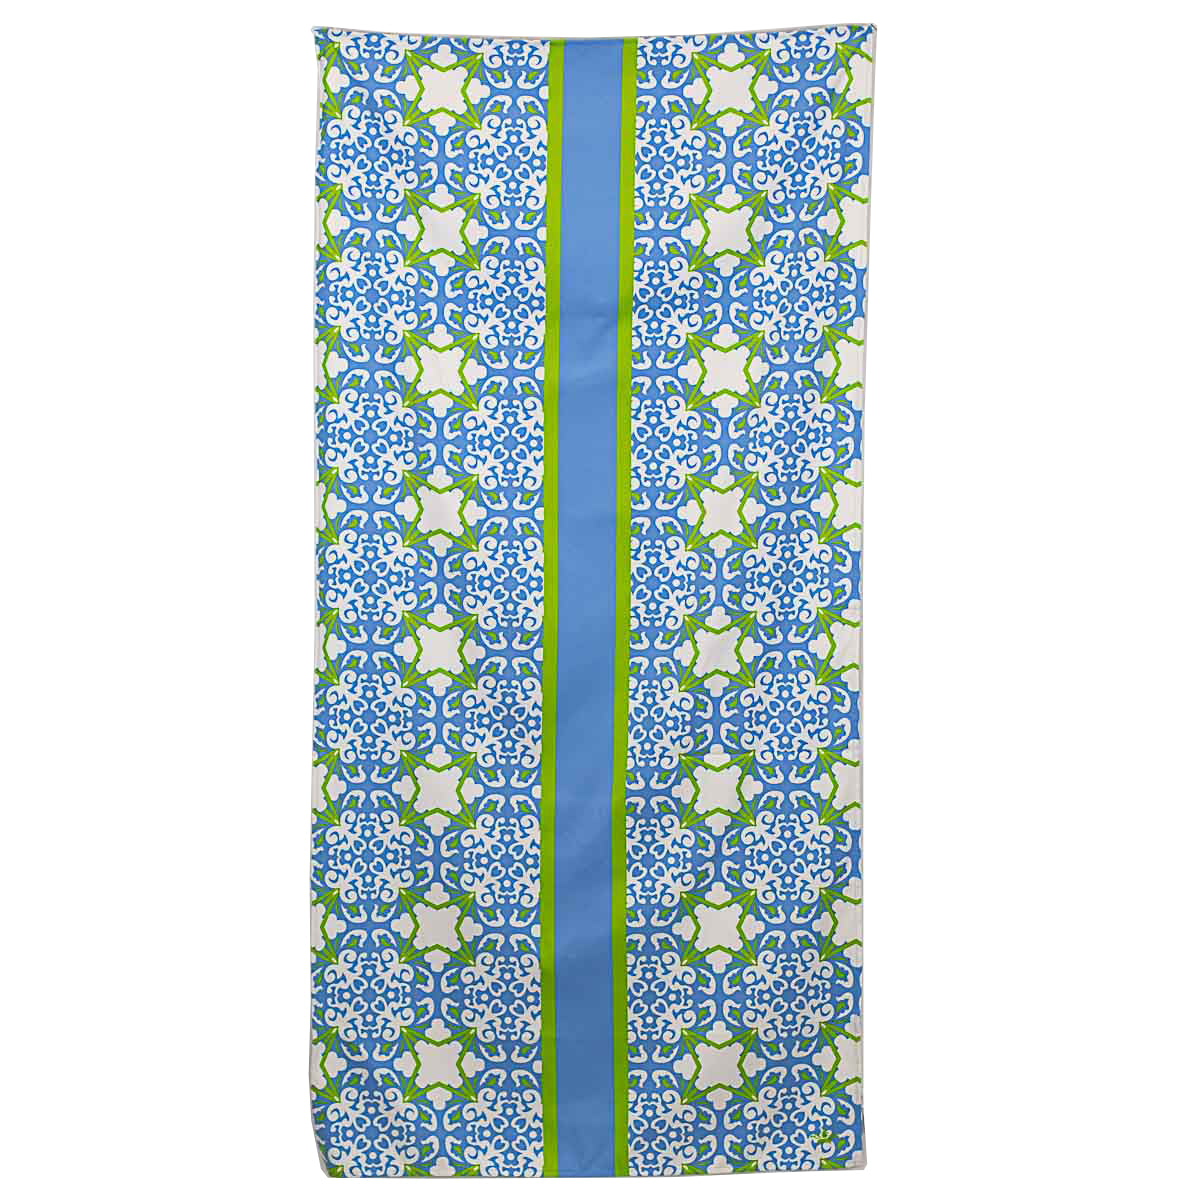 Palace Tile Beach Towel in Palace/Lime